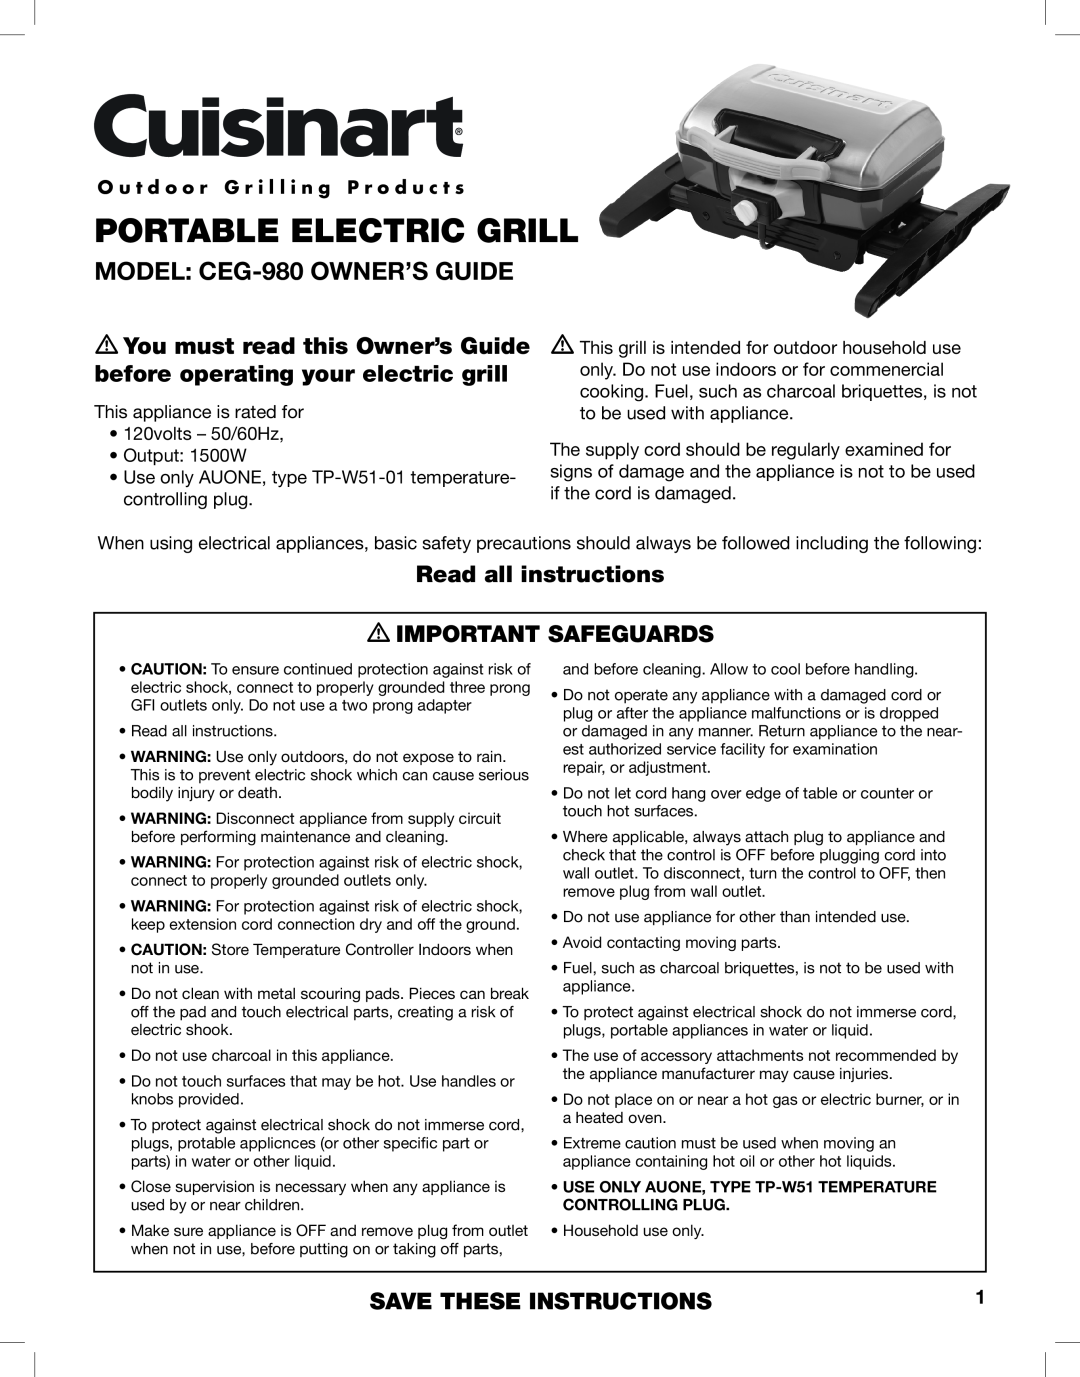 Cuisinart manual Portable Electric Grill, MODEL CEG-980 OWNER’S GUIDE, Read all instructions m IMPORTANT SAFEGUARDS 